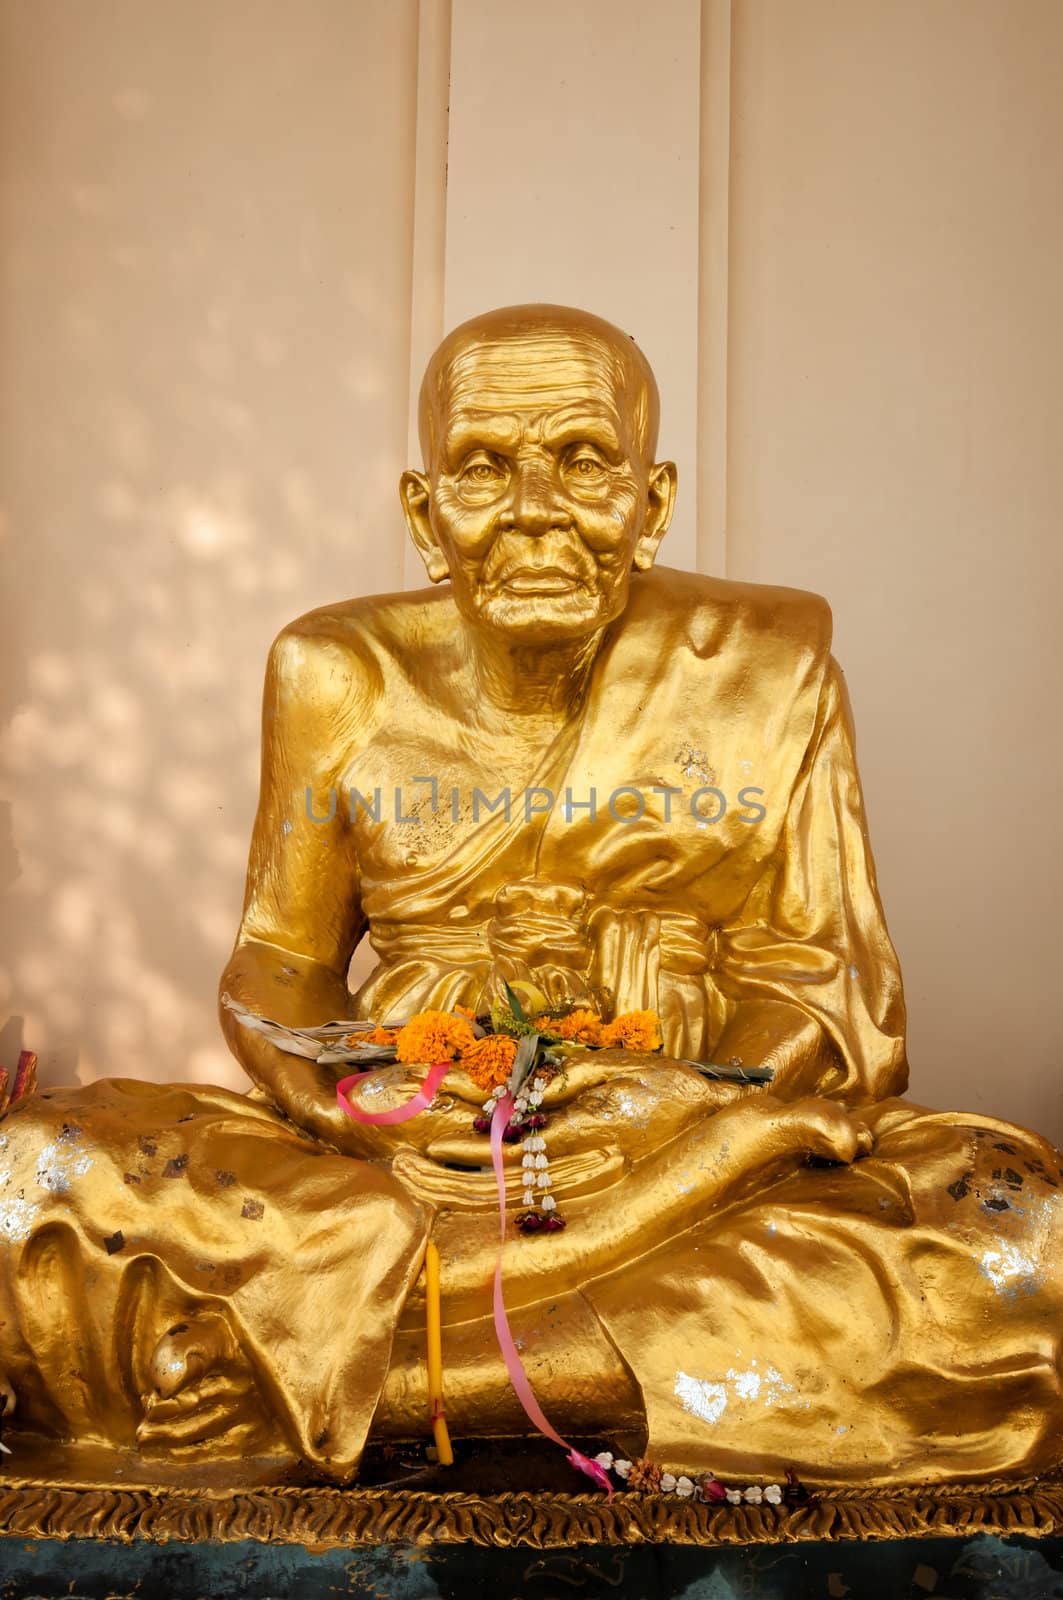 Gold buddhist monk statue by johnnychaos